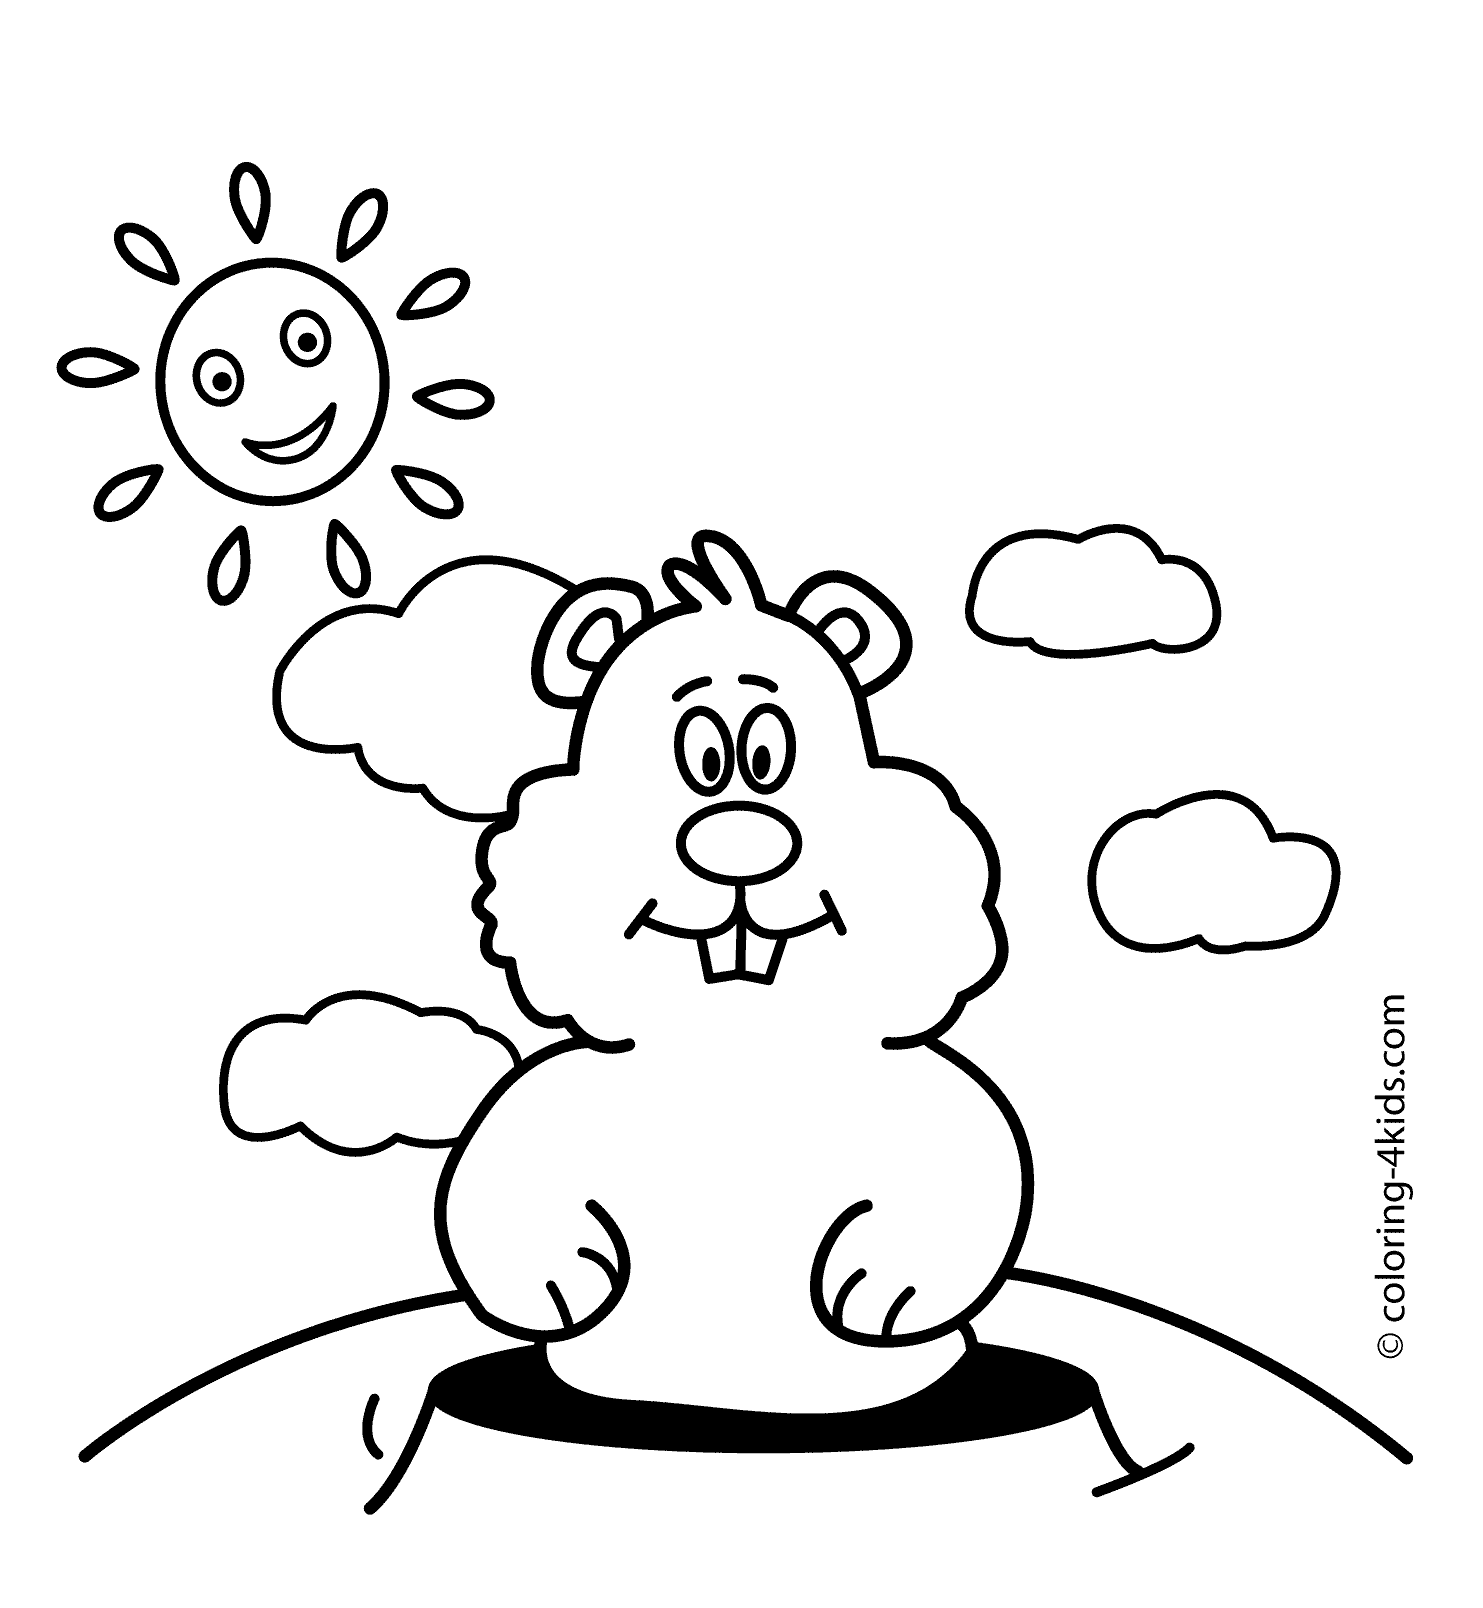 groundhog coloring pages - High Quality Coloring Pages